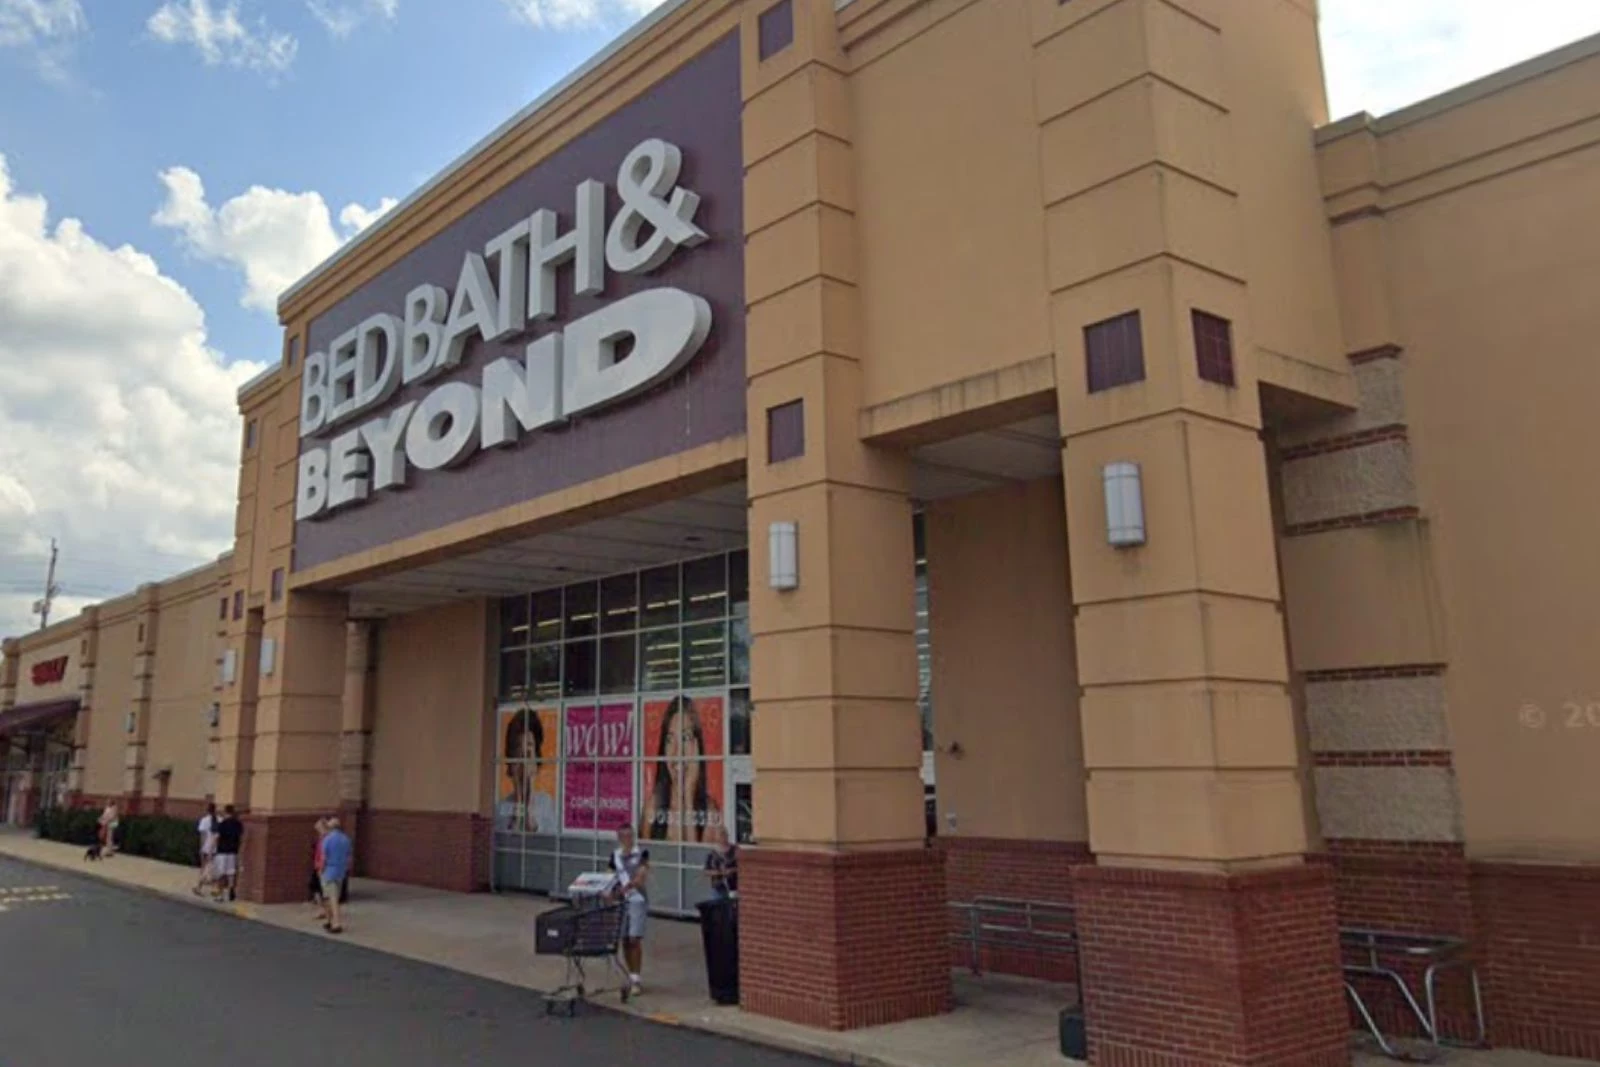 Bed Bath & Beyond coupons being accepted by these NJ competitors